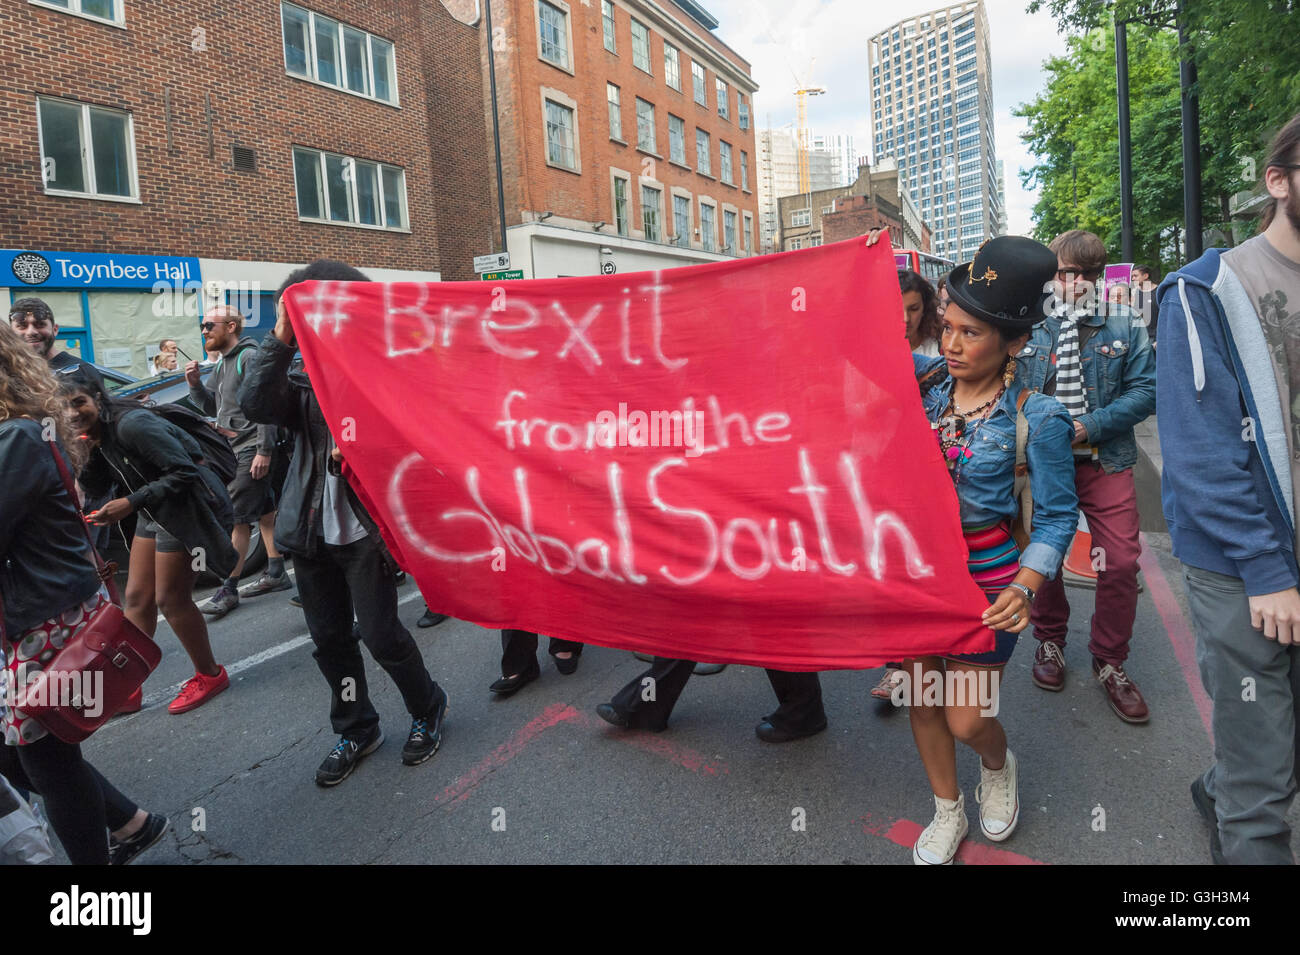 London, UK. June 24th 2016. Protesters, including two carrying a banner '#Brexit from the Global South', march from the rally in Altab Ali Park to the offices of News International on the day after the UK voted to leave the EU. They were protesting against racism, for migrant rights and against fascist violence and argue that migration and immigrants have been attacked and scapegoated not only by both Remain and Leave campaigns but by mainstream parties and media over more than 20 years, stoking up hatred by insisting immigrants are a 'problem'. Peter Marshall/Alamy Live News Stock Photo